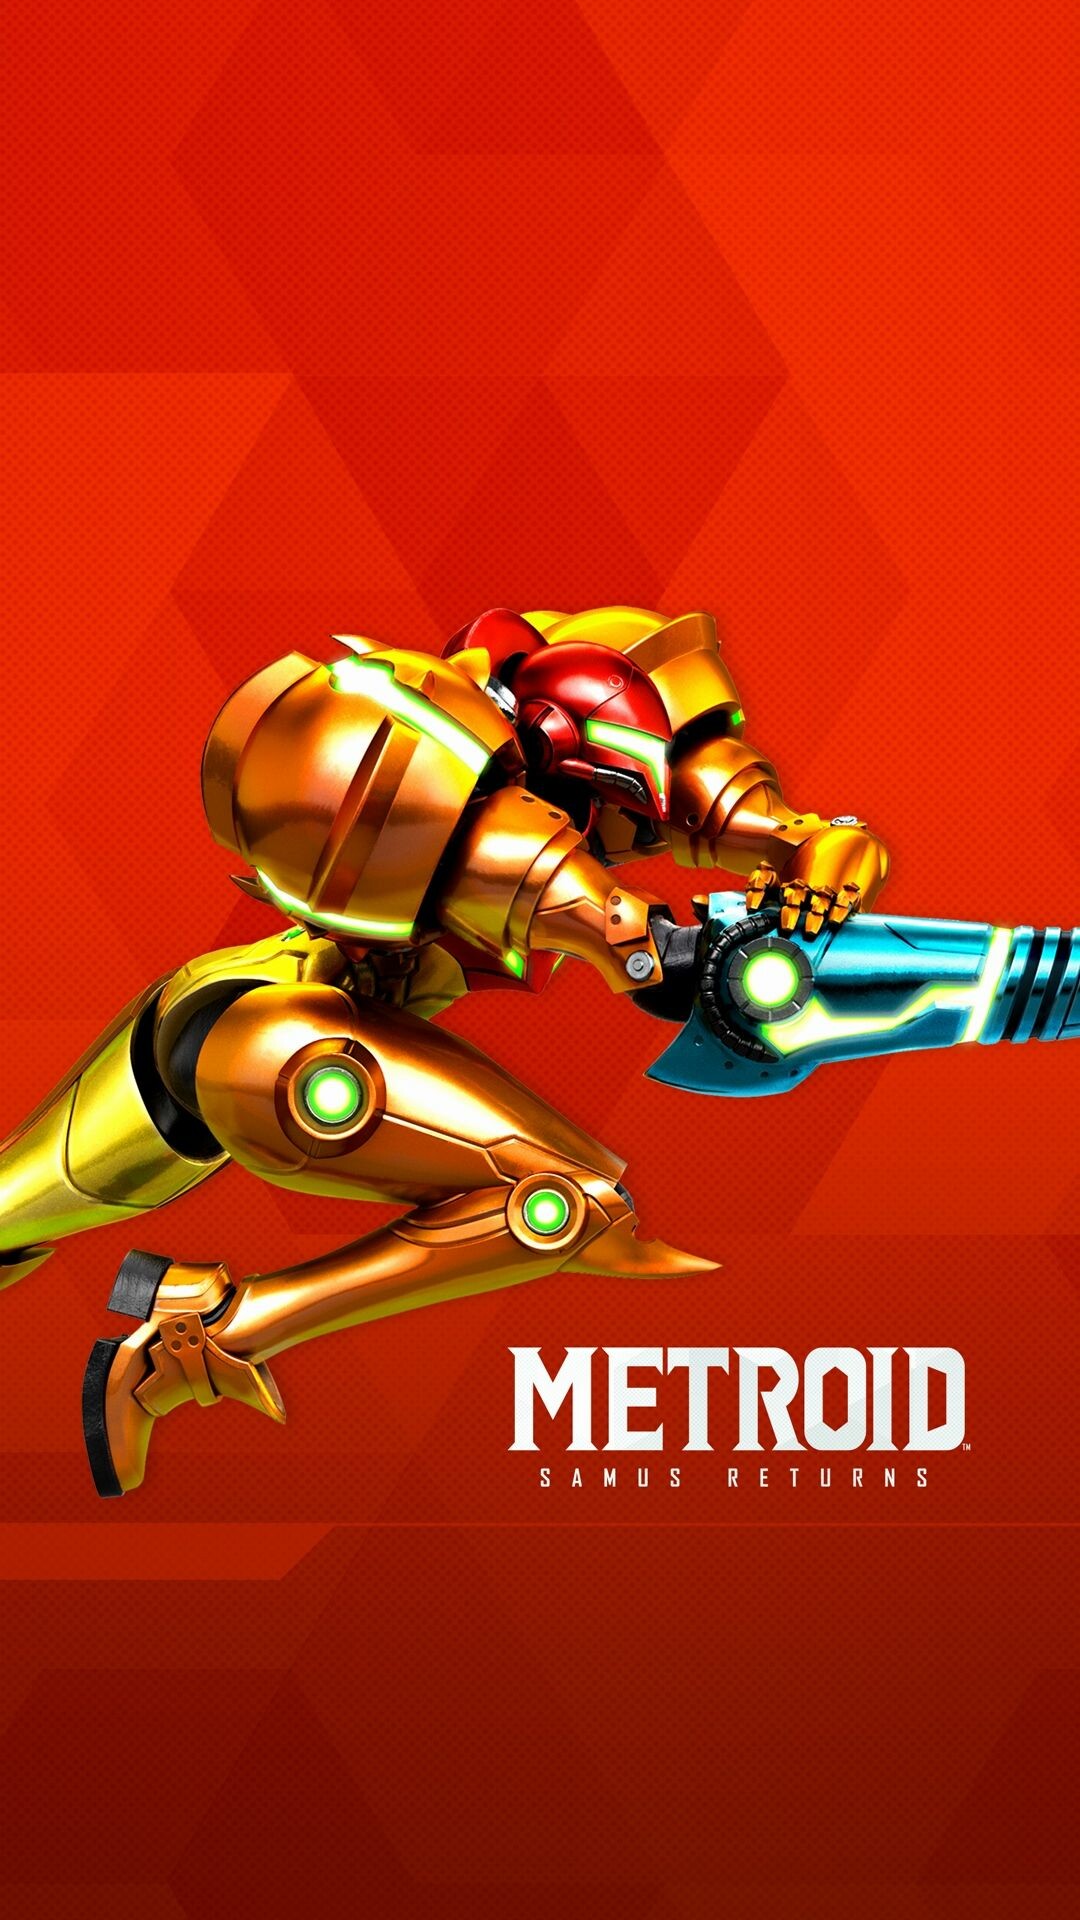 Metroid Dread: There are more than 20 suits, weapon, and ability upgrades in the game, and almost all of them are required to fully explore the map. 1080x1920 Full HD Wallpaper.